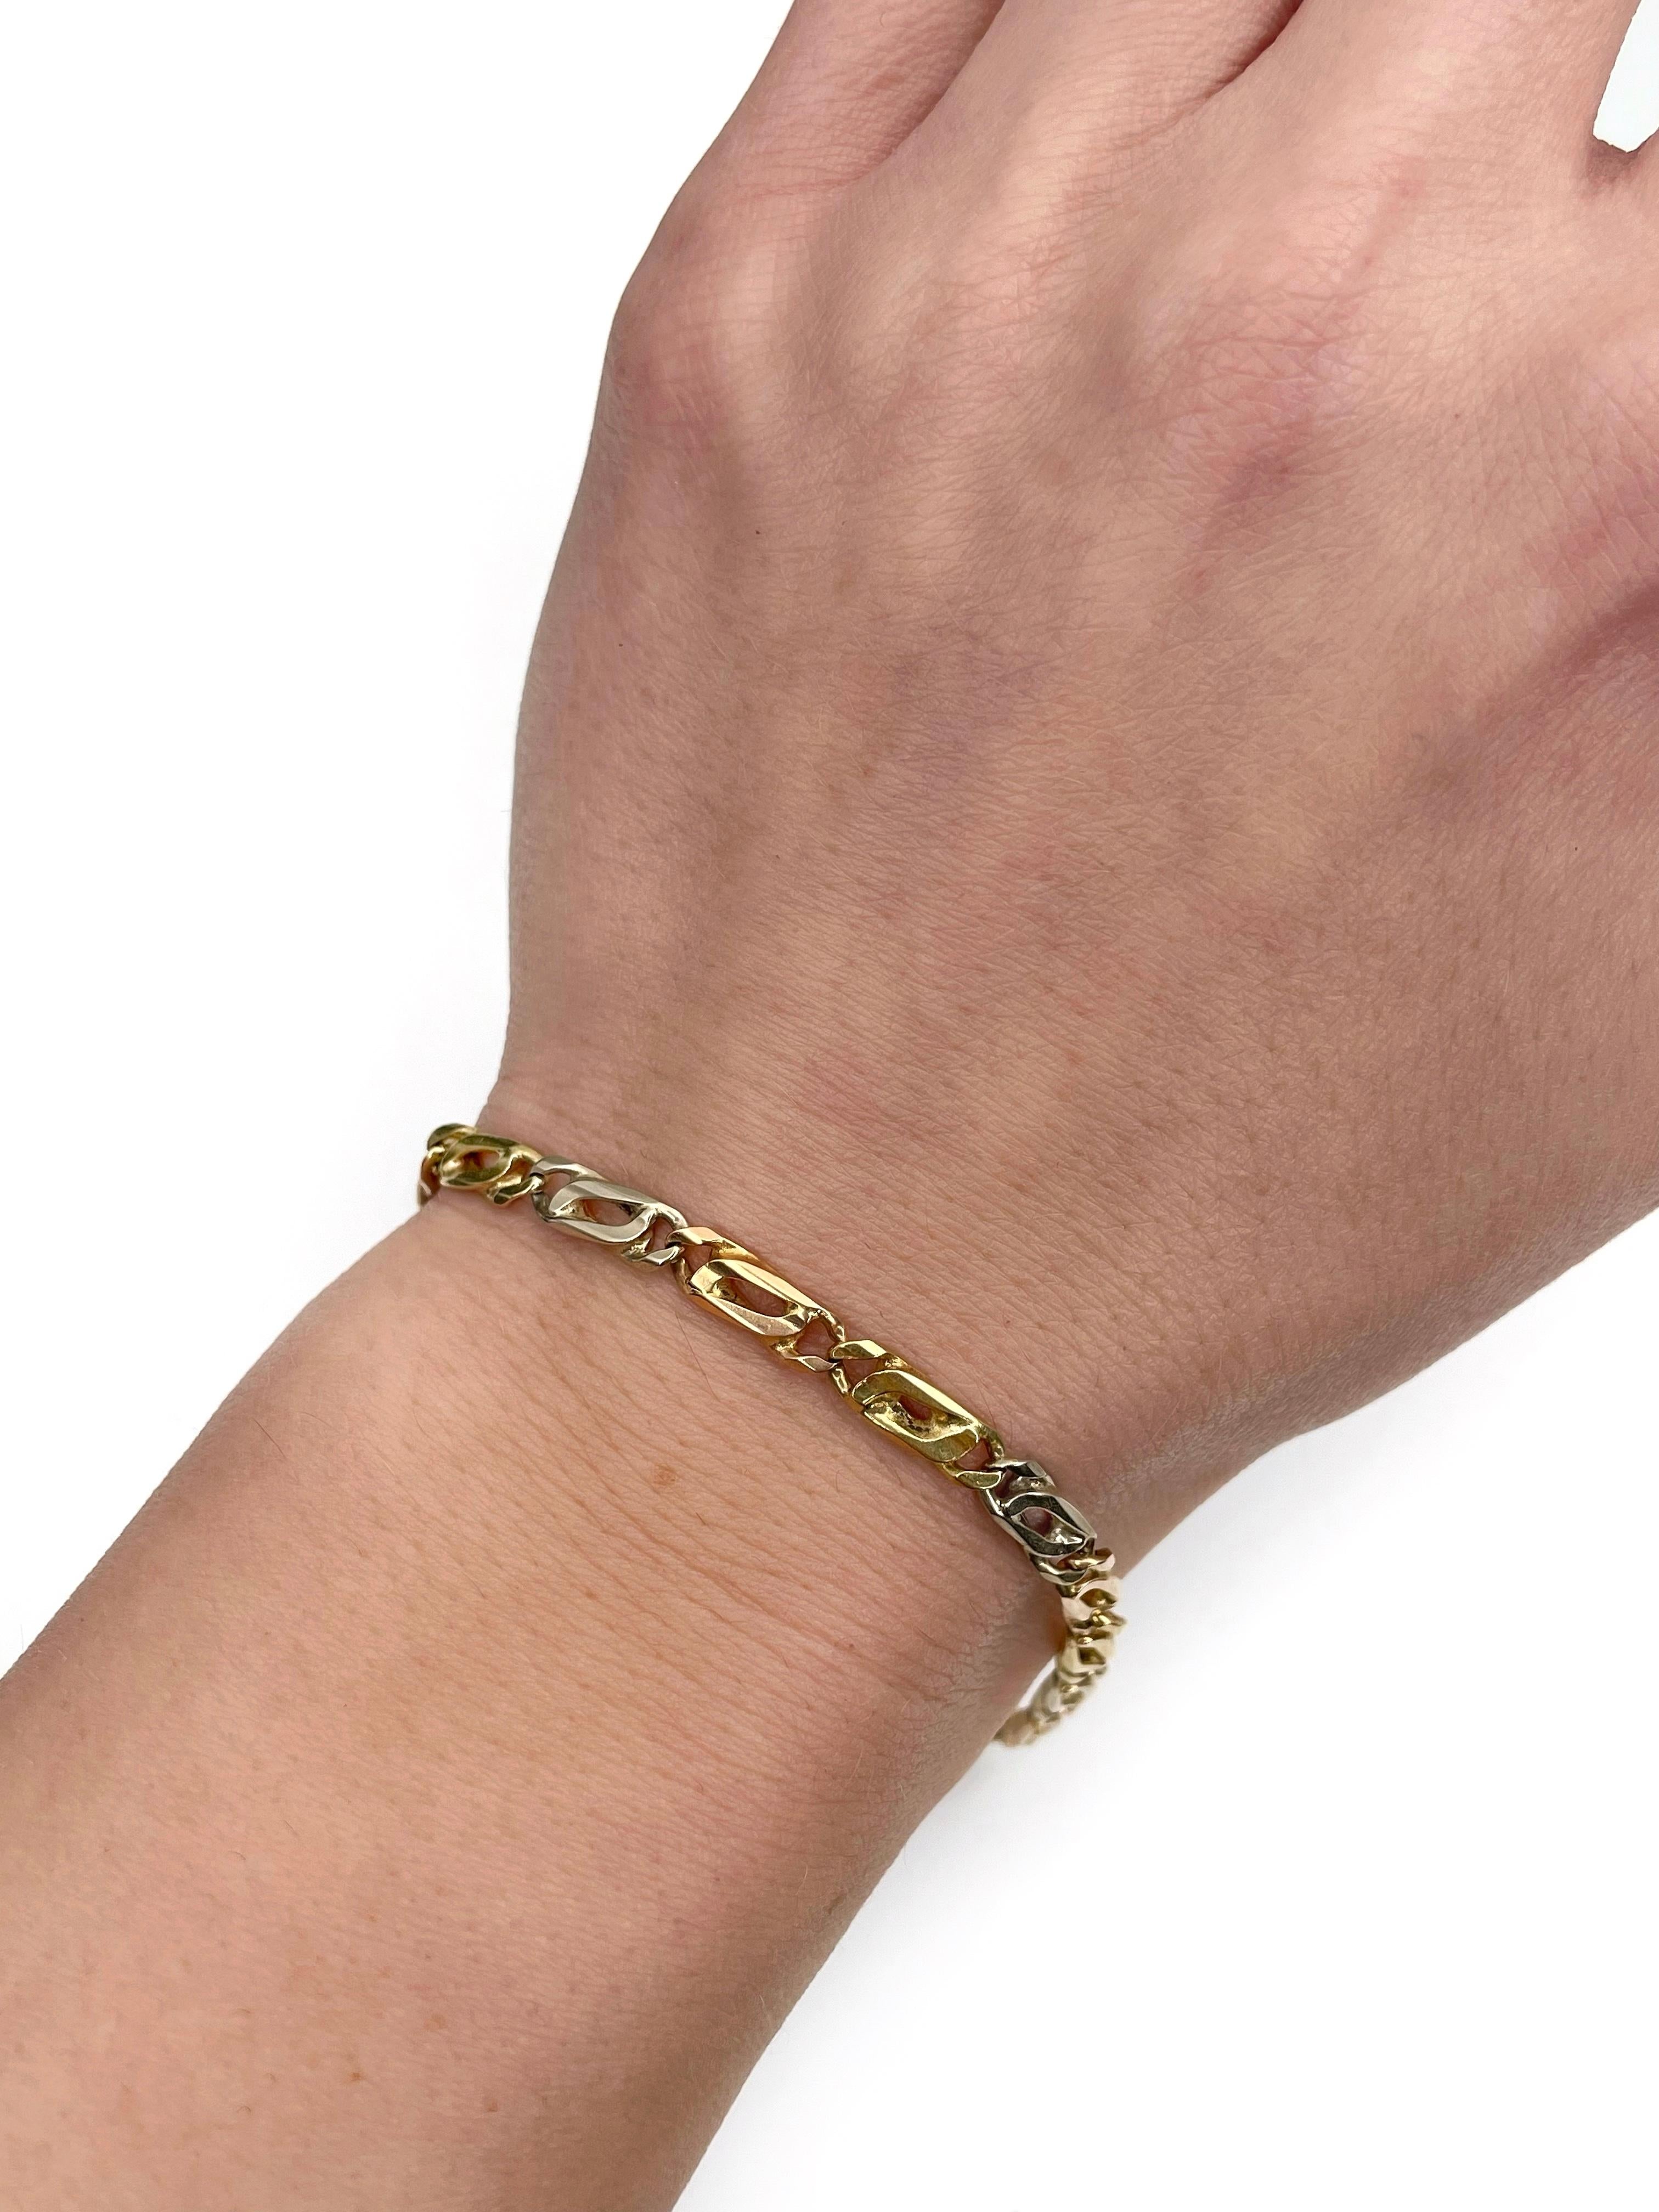 It is a vintage tri-colour chain link bracelet crafted in 18K gold. Circa 1970. It has a safe closure.

Weight: 12.58g
Length: 21cm
Width: 0.5cm

———

If you have any questions, please feel free to ask. We describe our items accurately. Please note